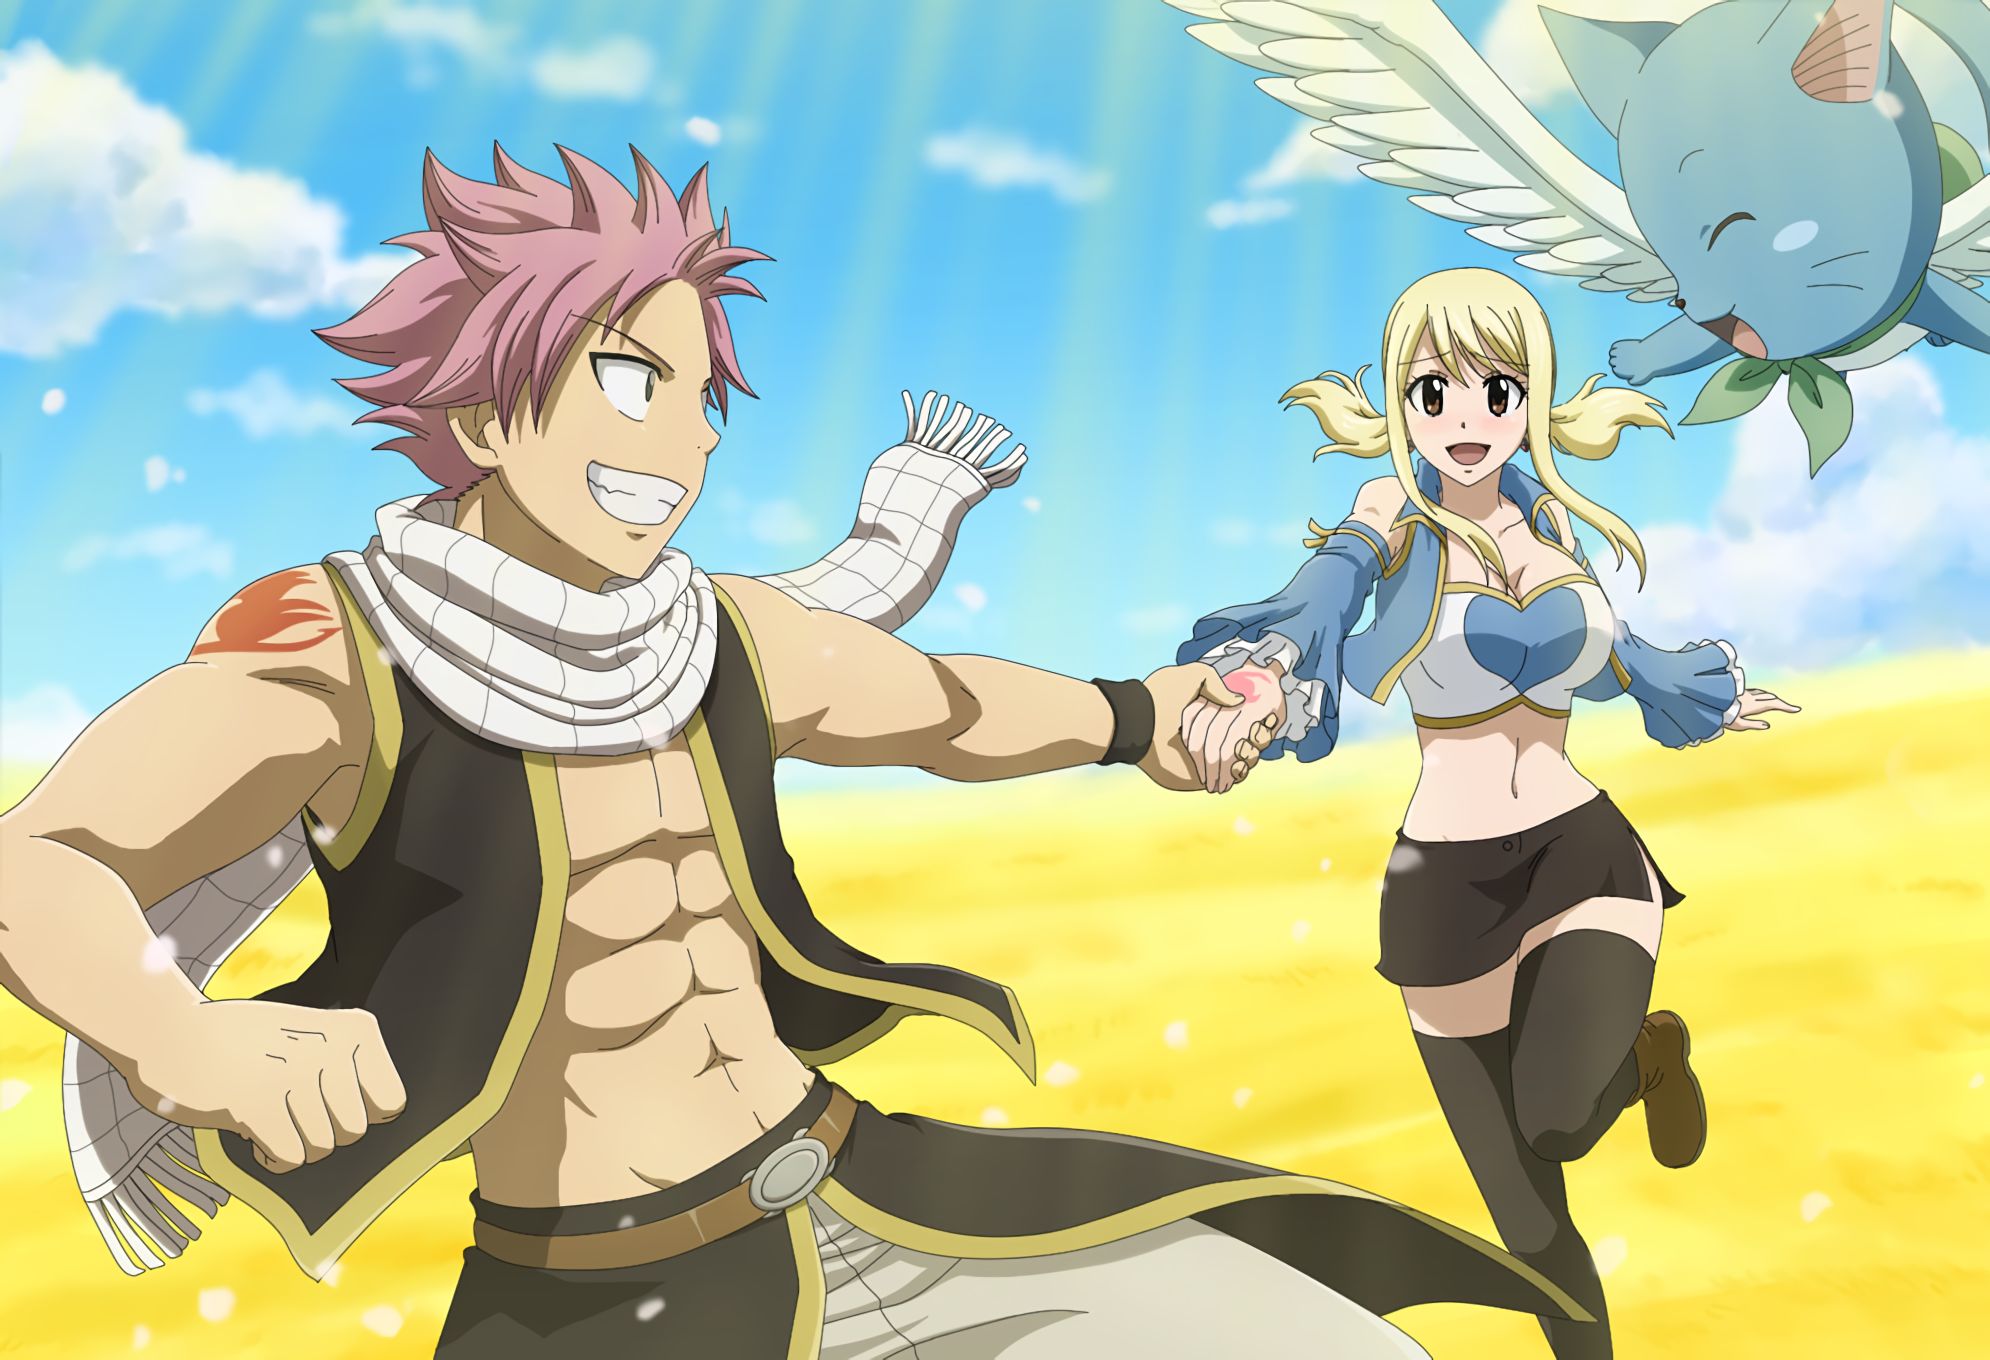 HD desktop wallpaper: Anime, Fairy Tail, Lucy Heartfilia, Natsu Dragneel,  Happy (Fairy Tail), Nalu (Fairy Tail) download free picture #753034